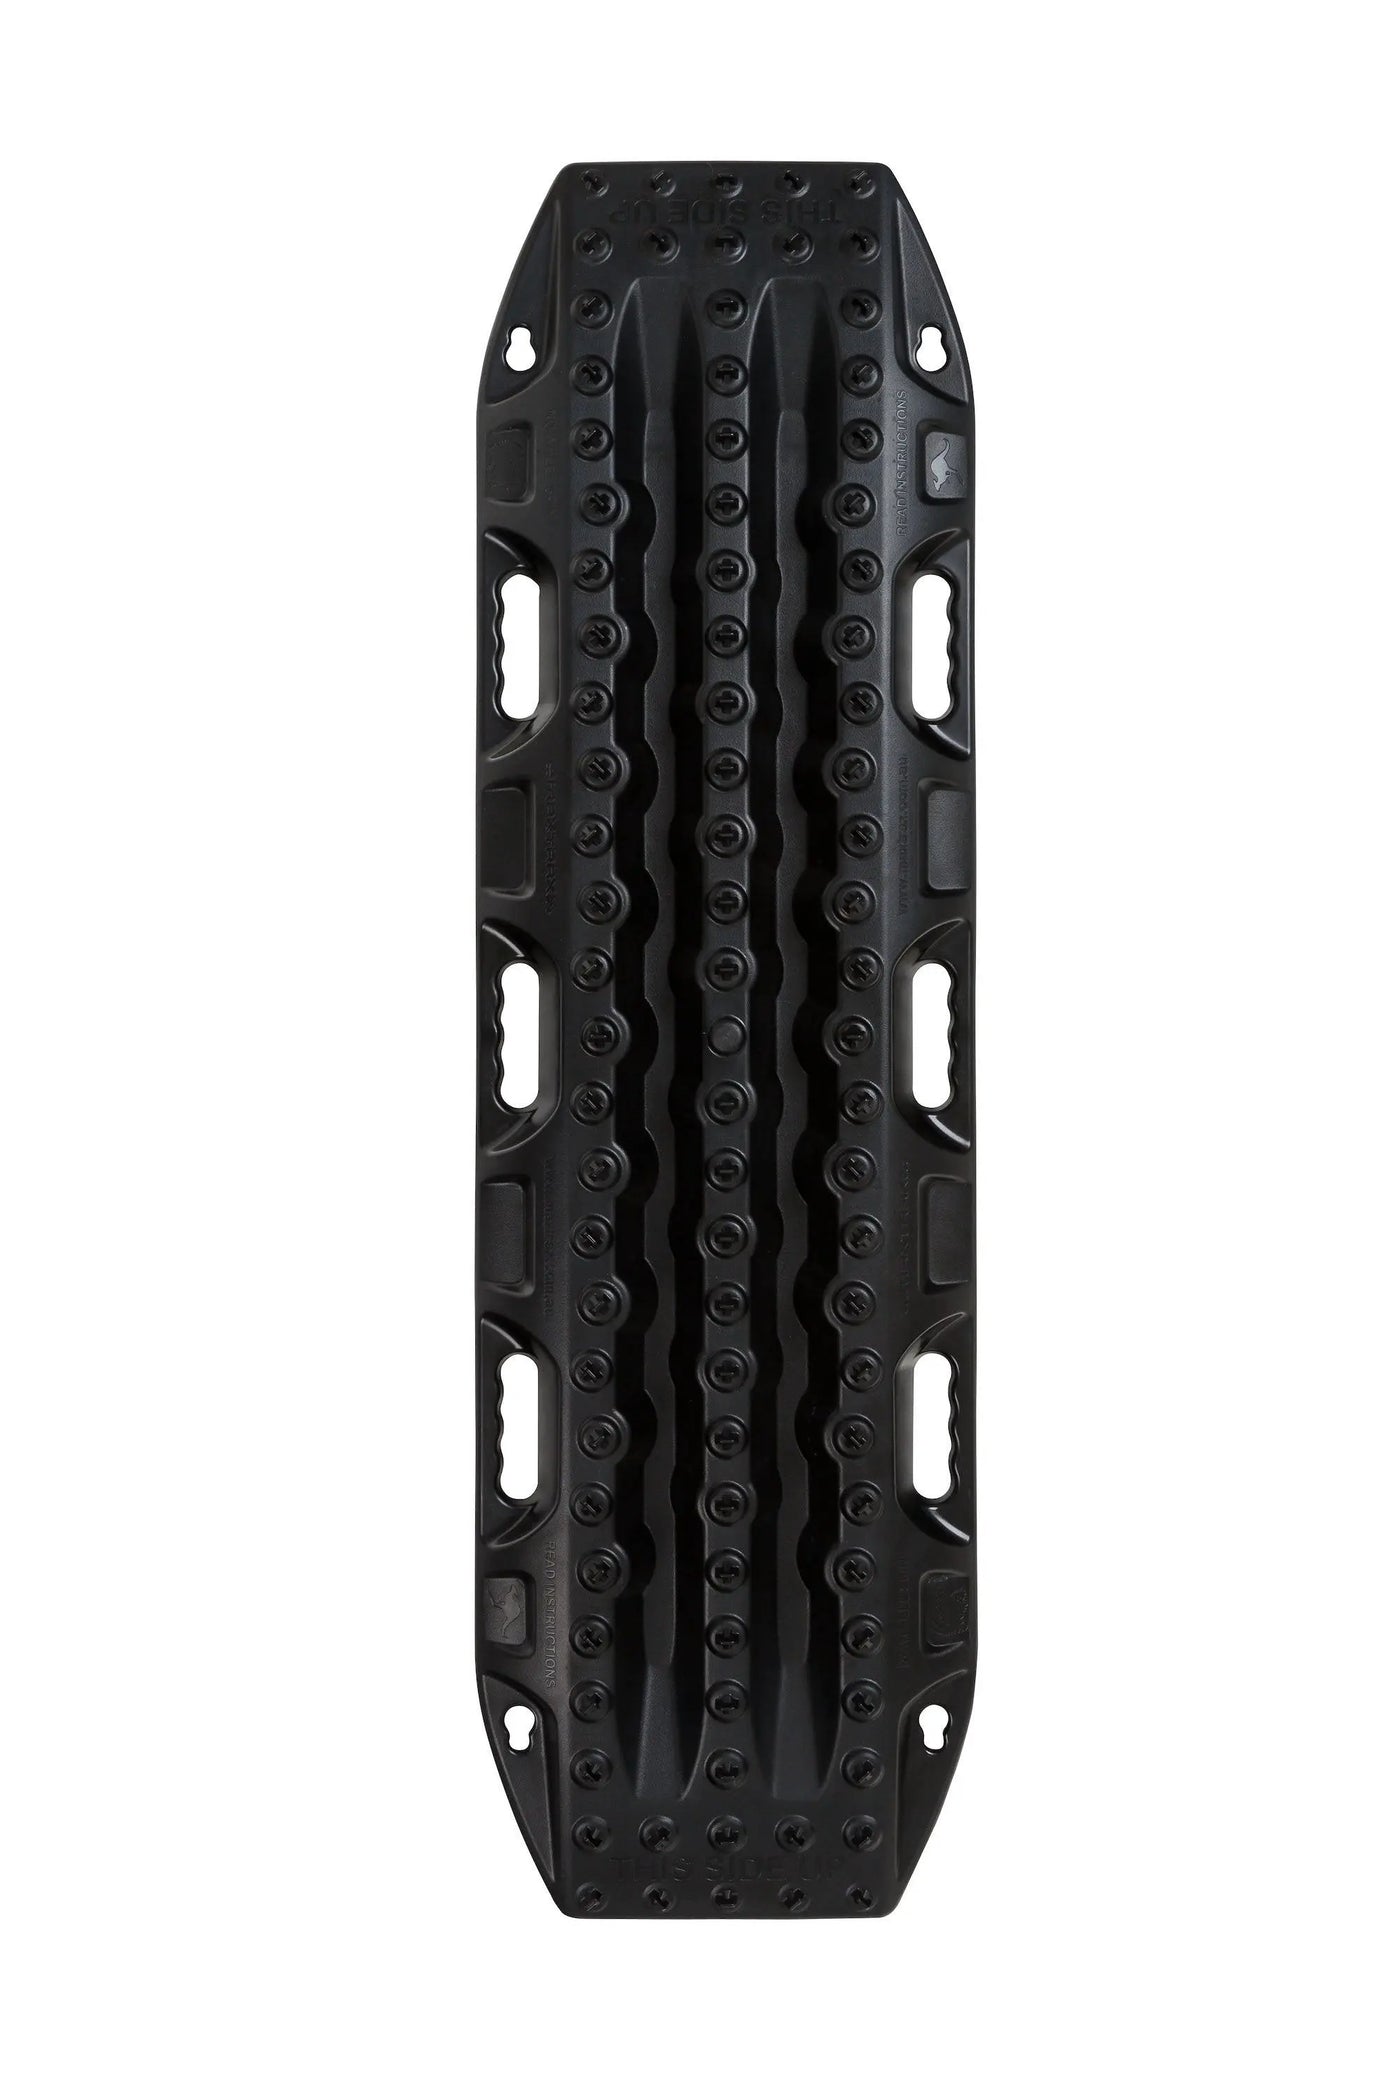 MAXTRAX MKII Black Recovery Boards - Wheel Every Weekend